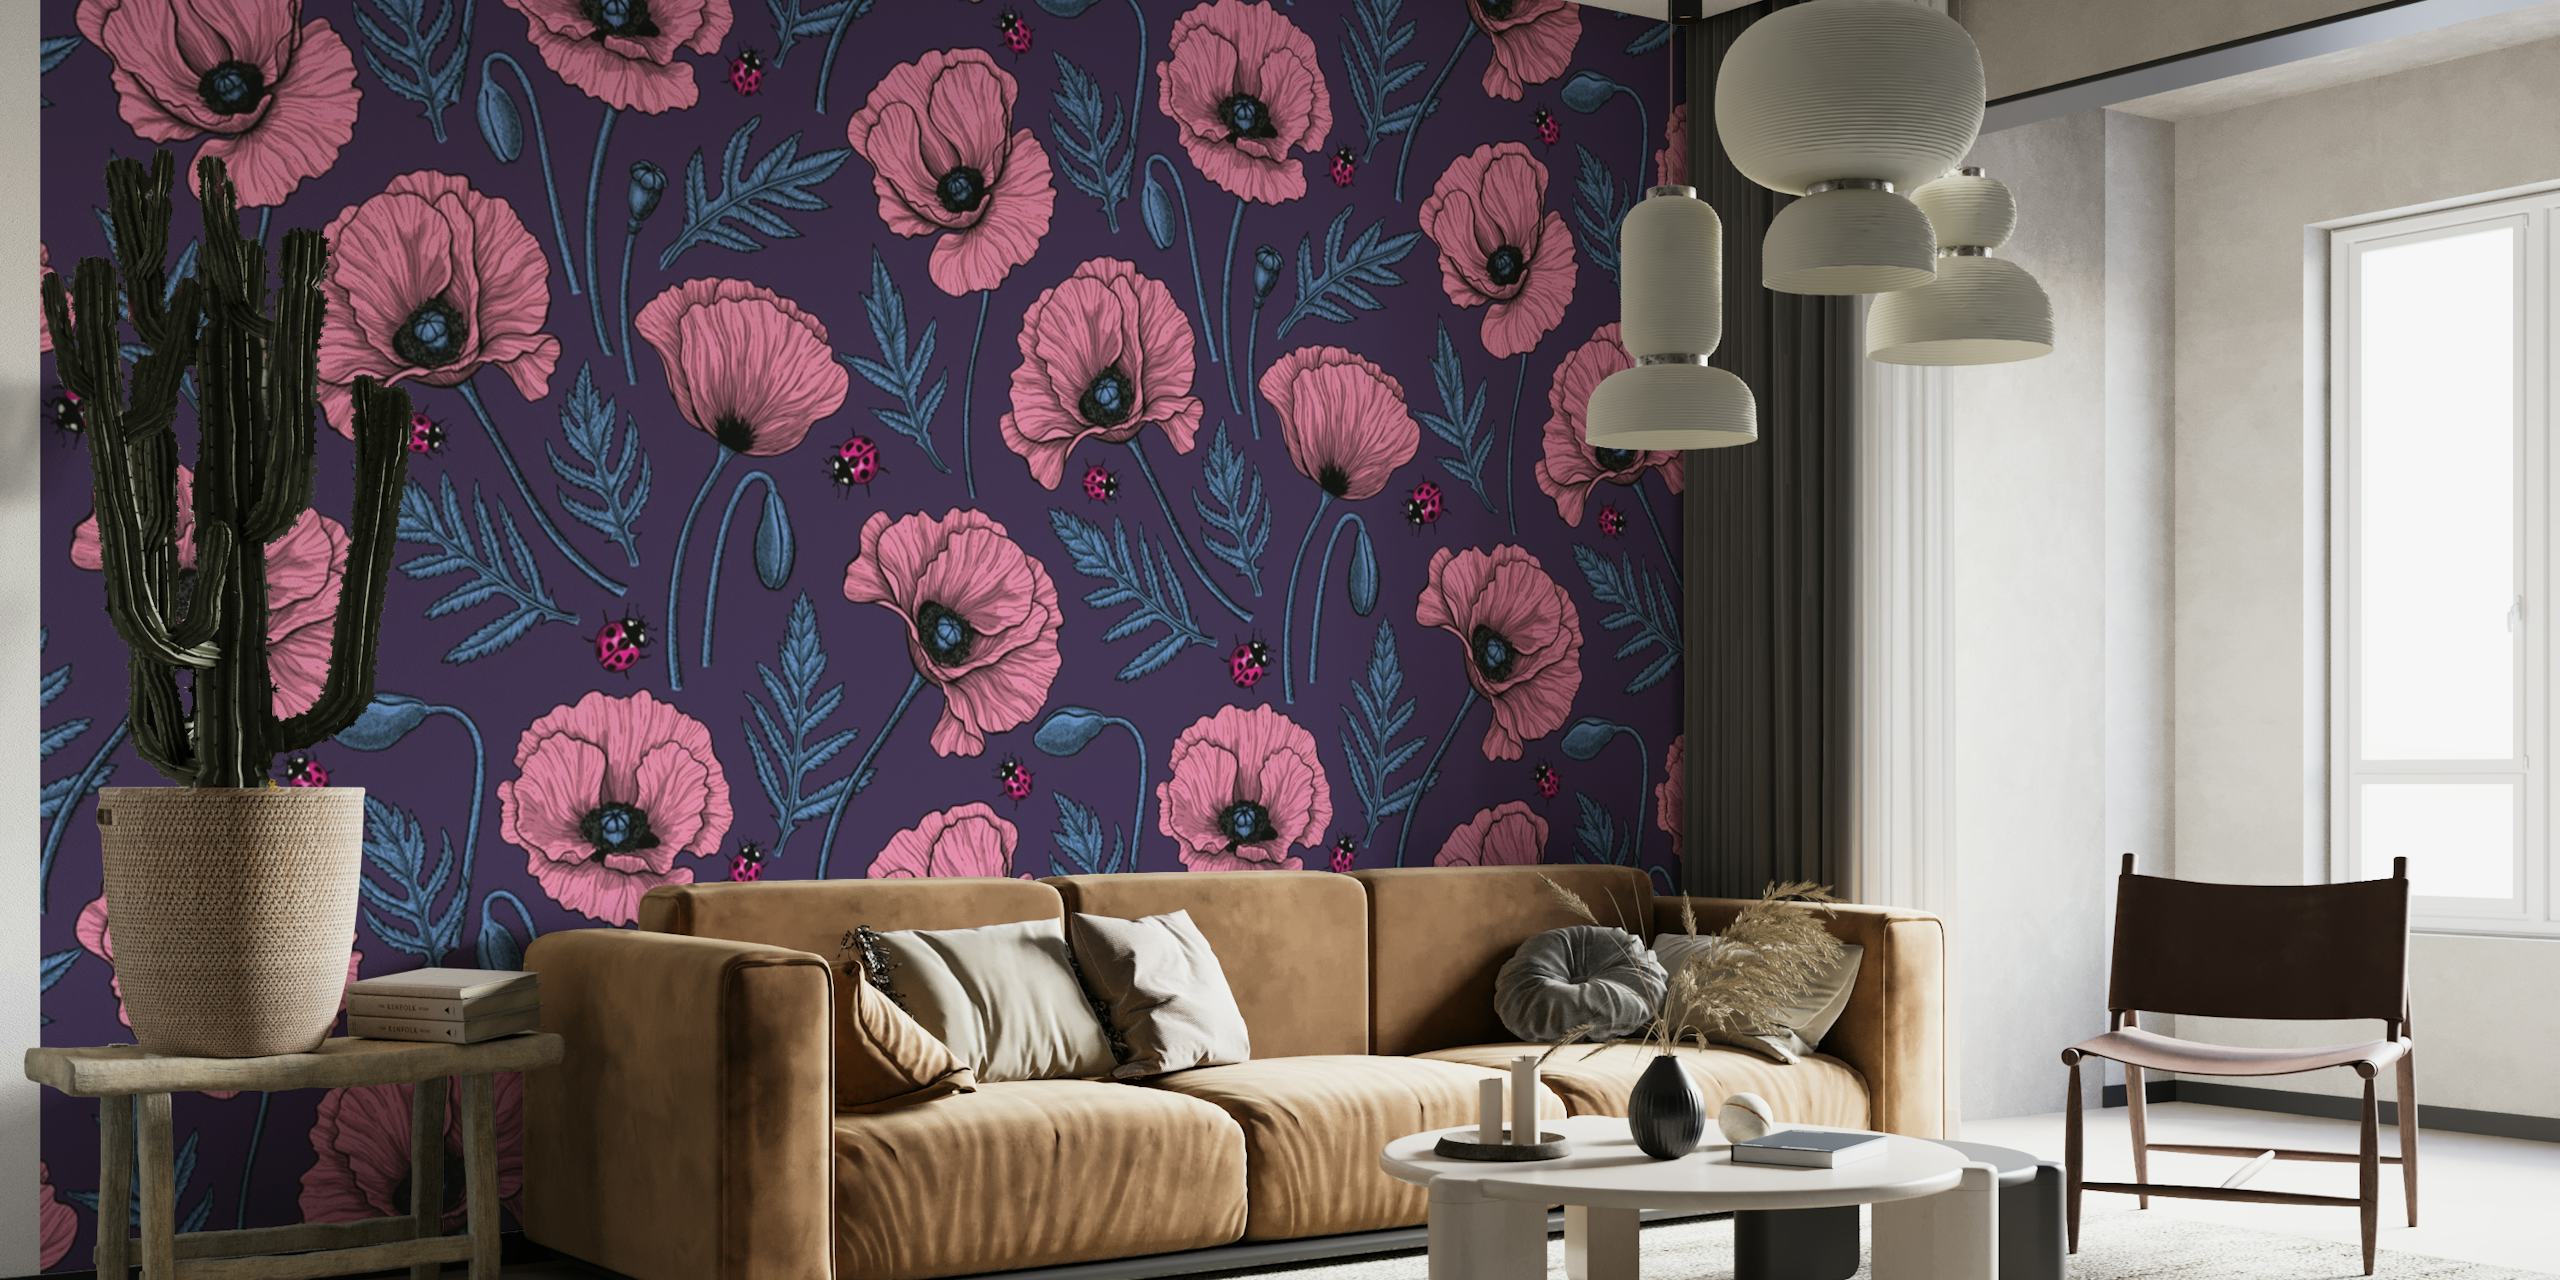 Pink poppies and ladybugs wallpaper